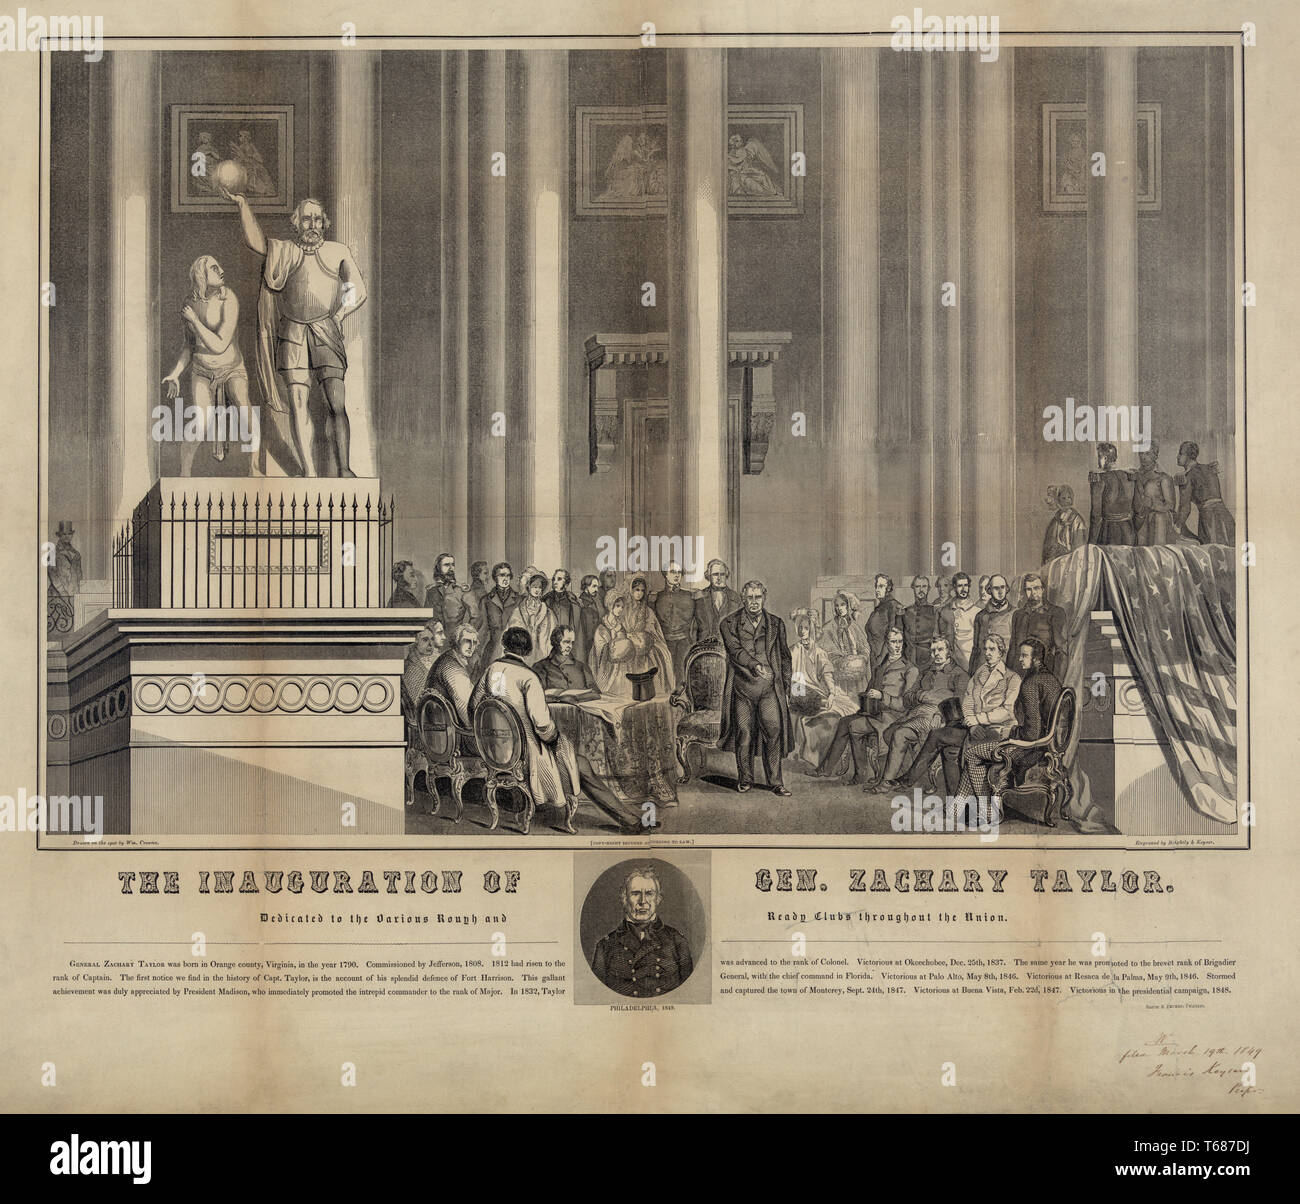 The Inauguration of Gen. Zachary Taylor, Drawn by William Croome, Engraved by Brightley & Keyser, 1849 Stock Photo